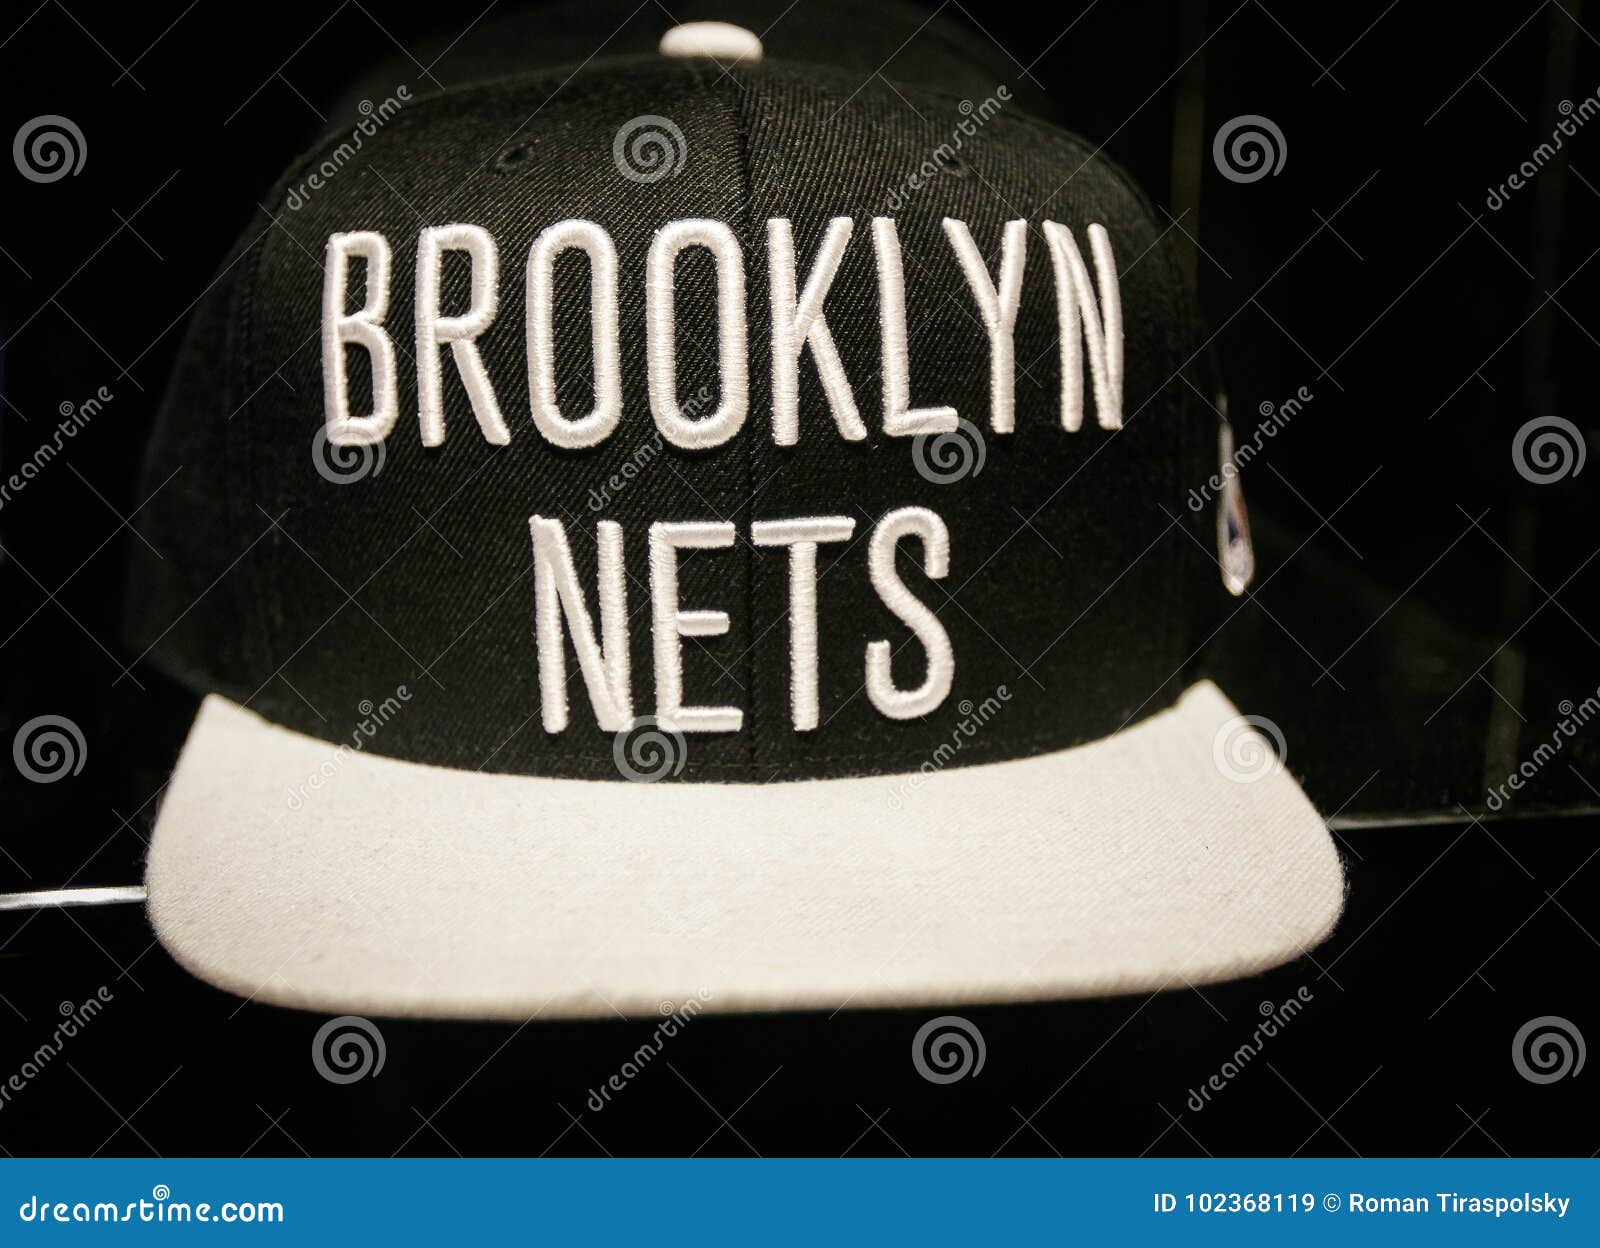 Brooklyn Nets hat editorial stock image. Image of basketball - 102368119